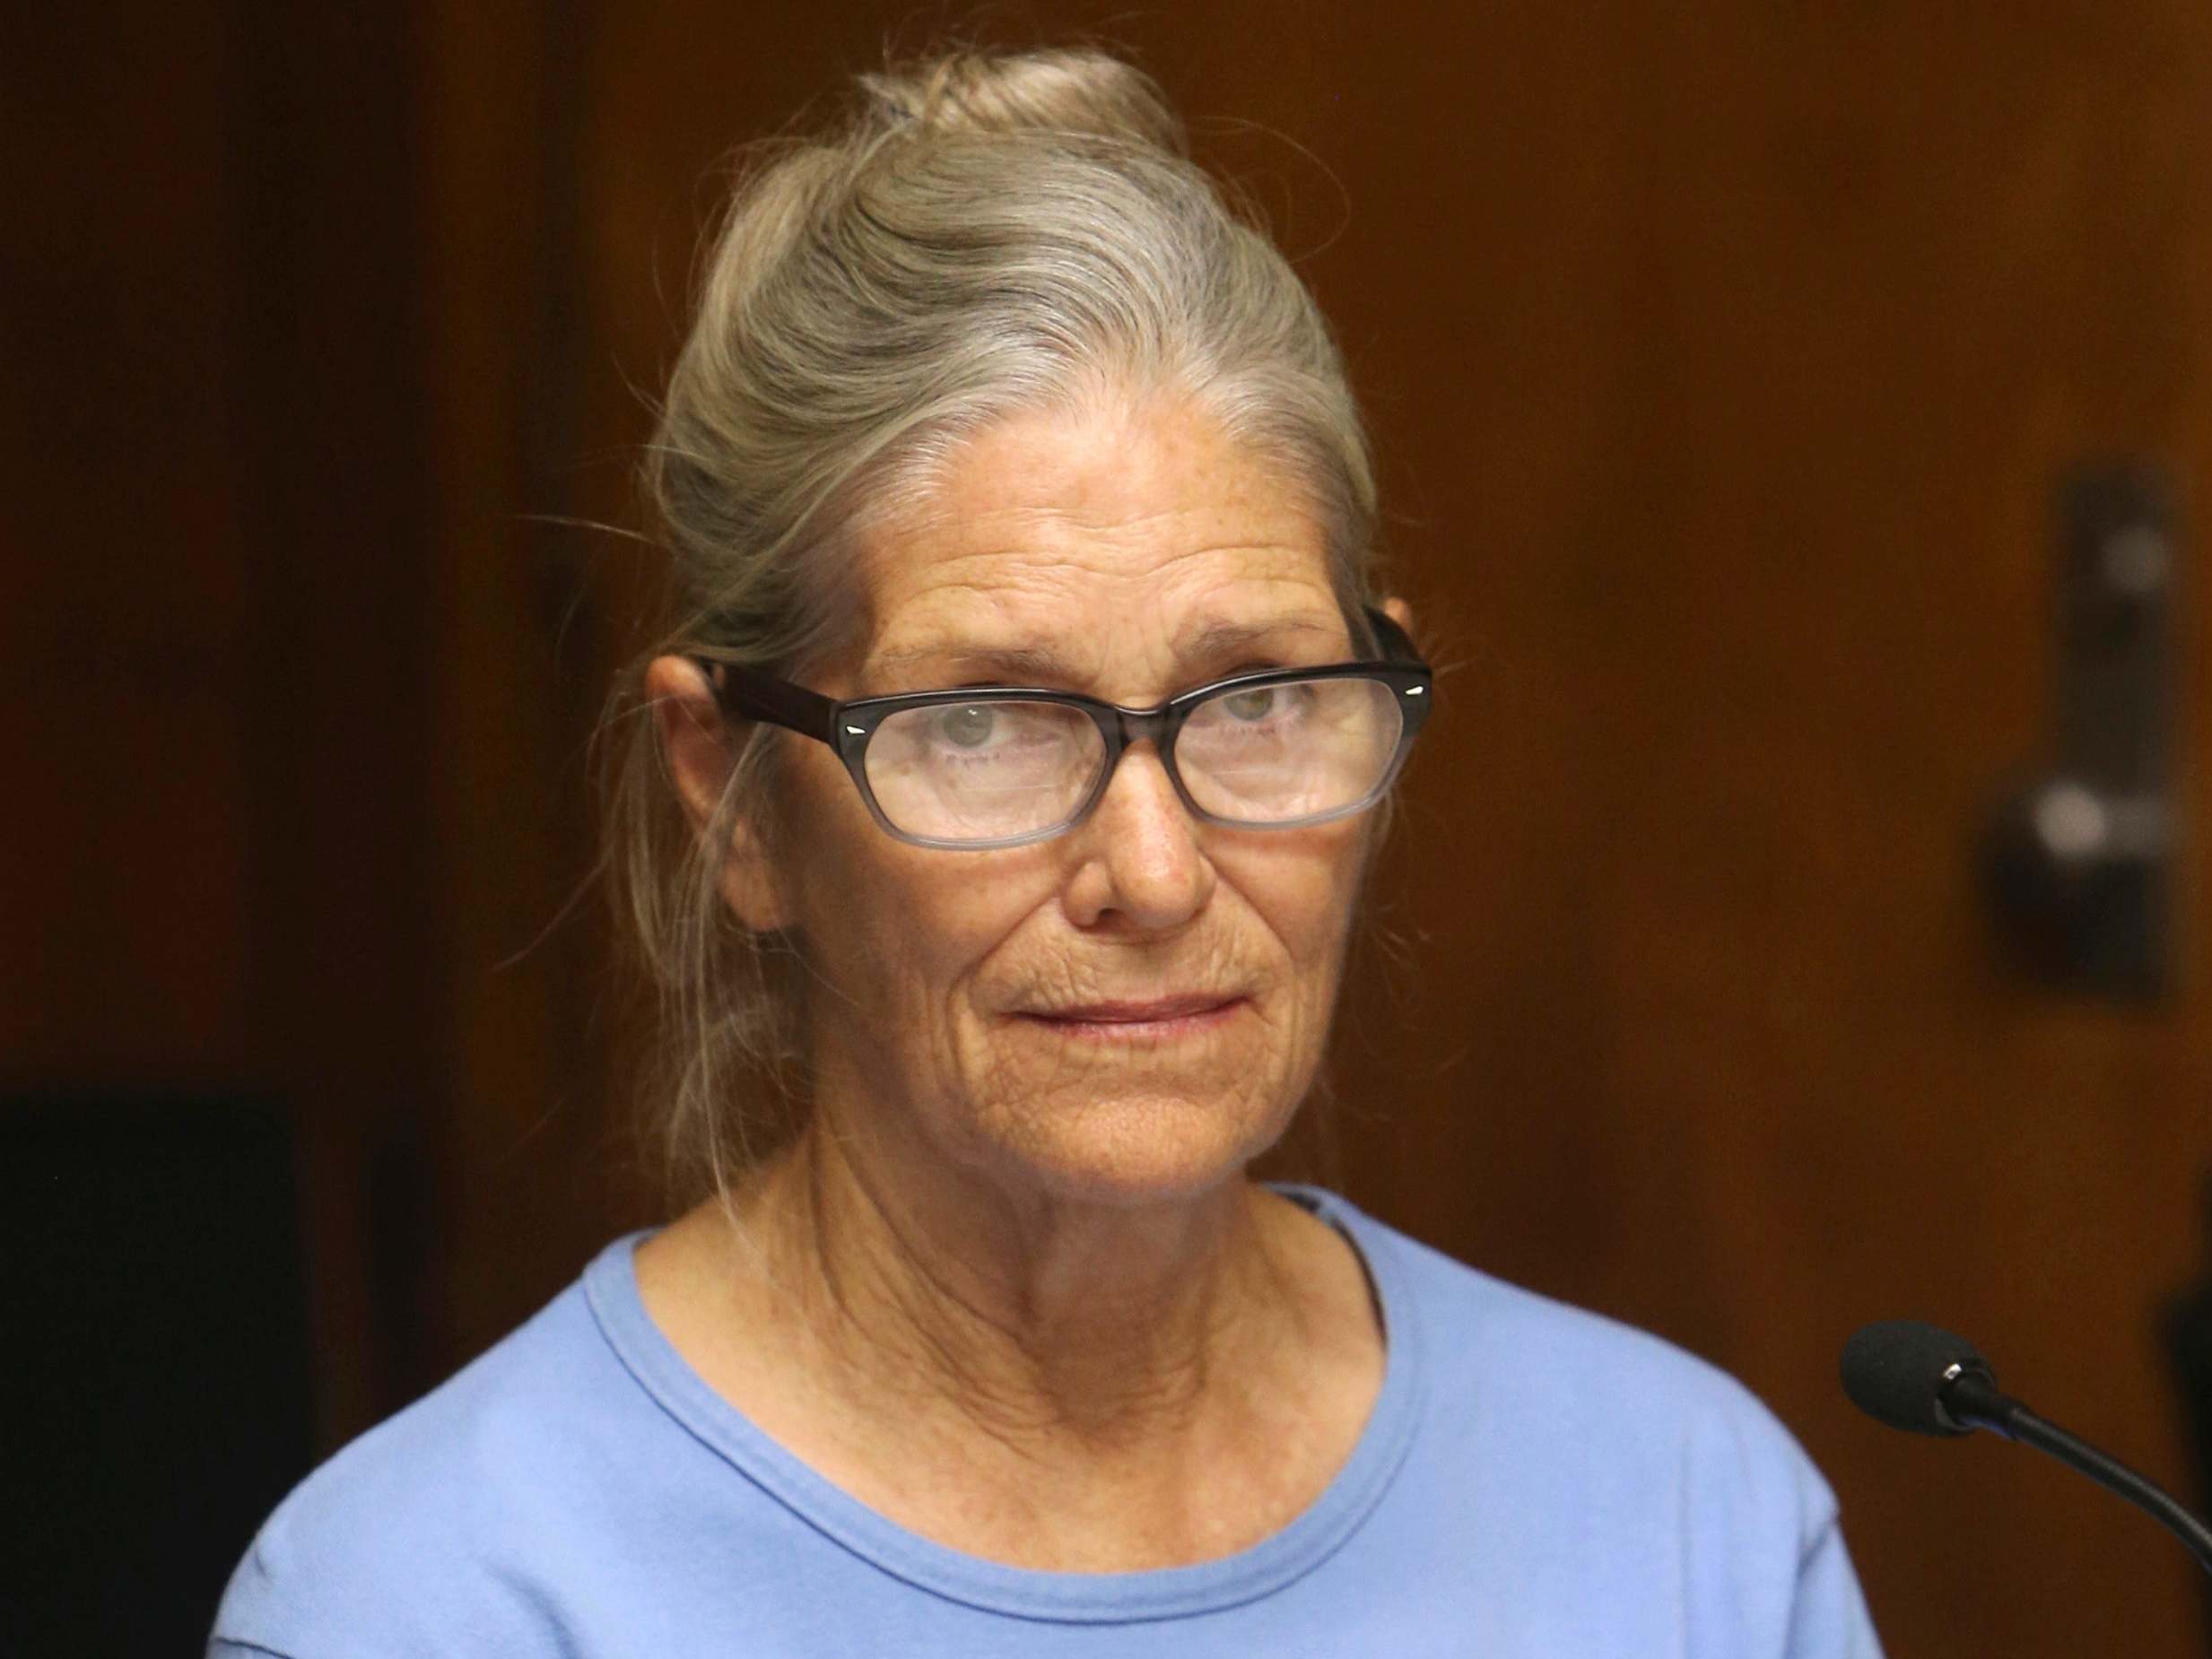 Leslie Van Houten at her parole hearing at the California Institution for Women in Corona